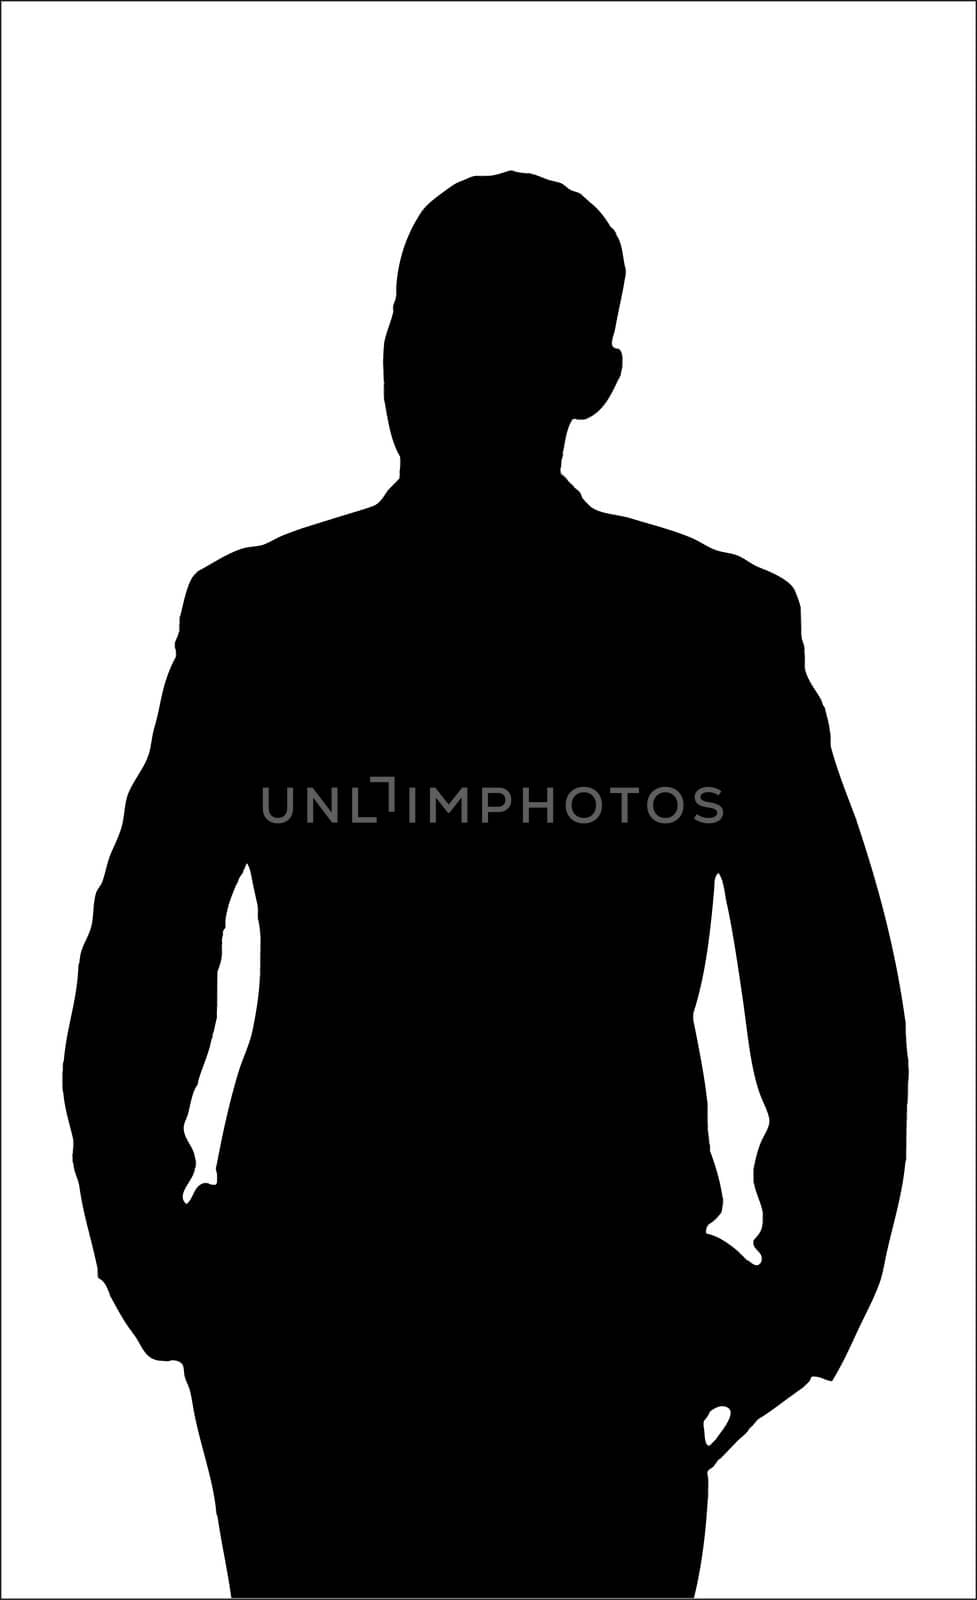 Annoyed Man Silhouette  by mwp1969